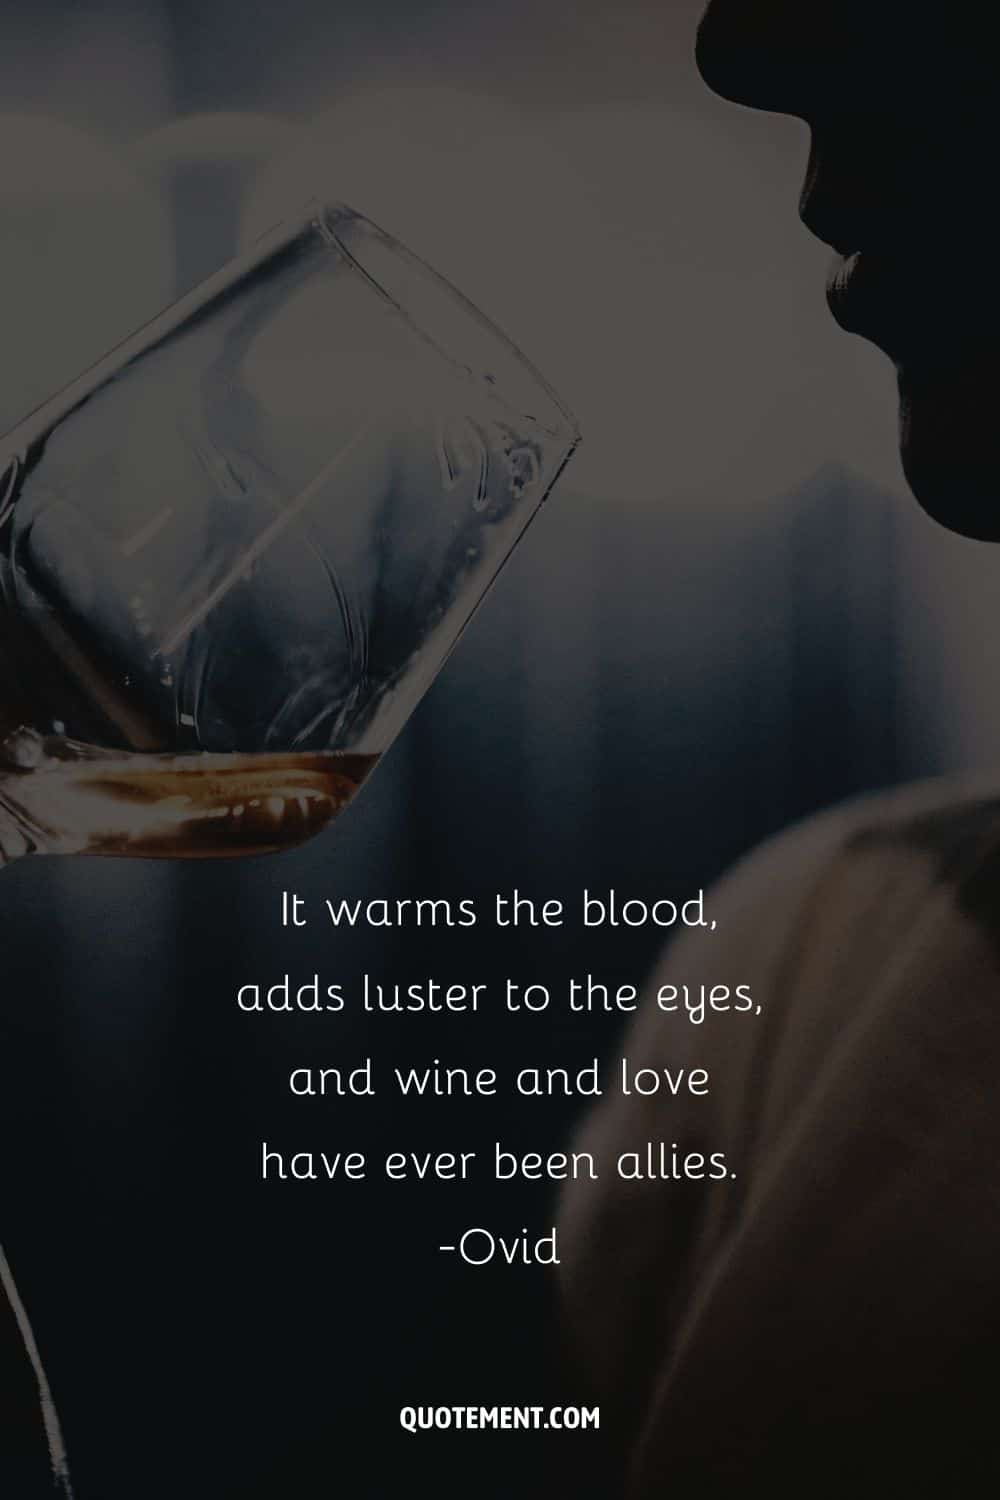 It warms the blood, adds luster to the eyes, and wine and love have ever been allies.